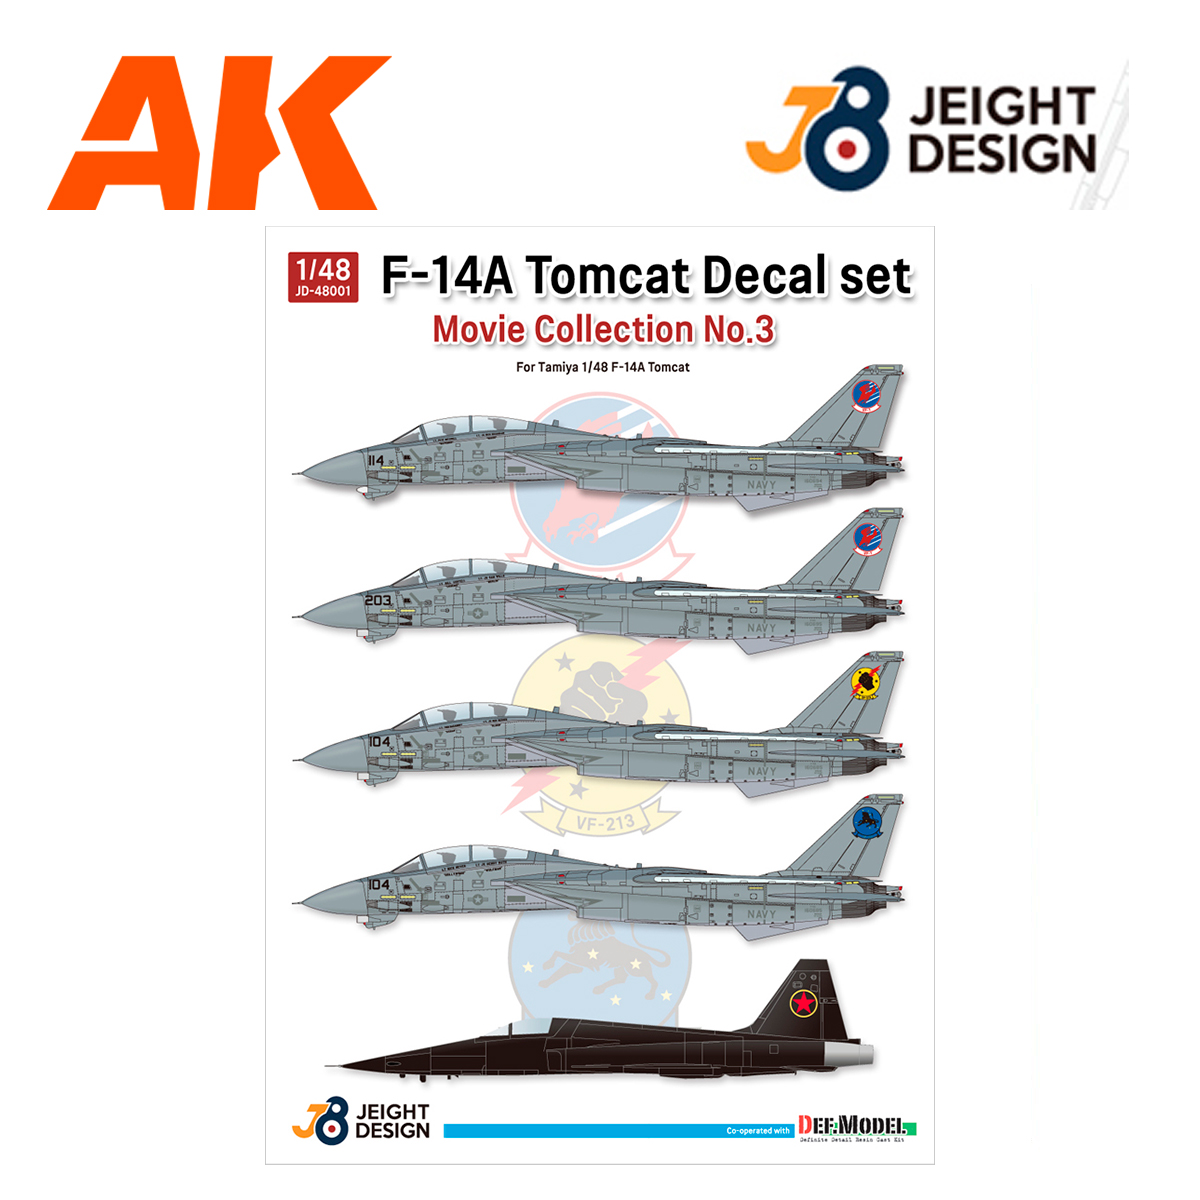 F-14A Tomcat 1/48 Decal set – Movie Collection No.3